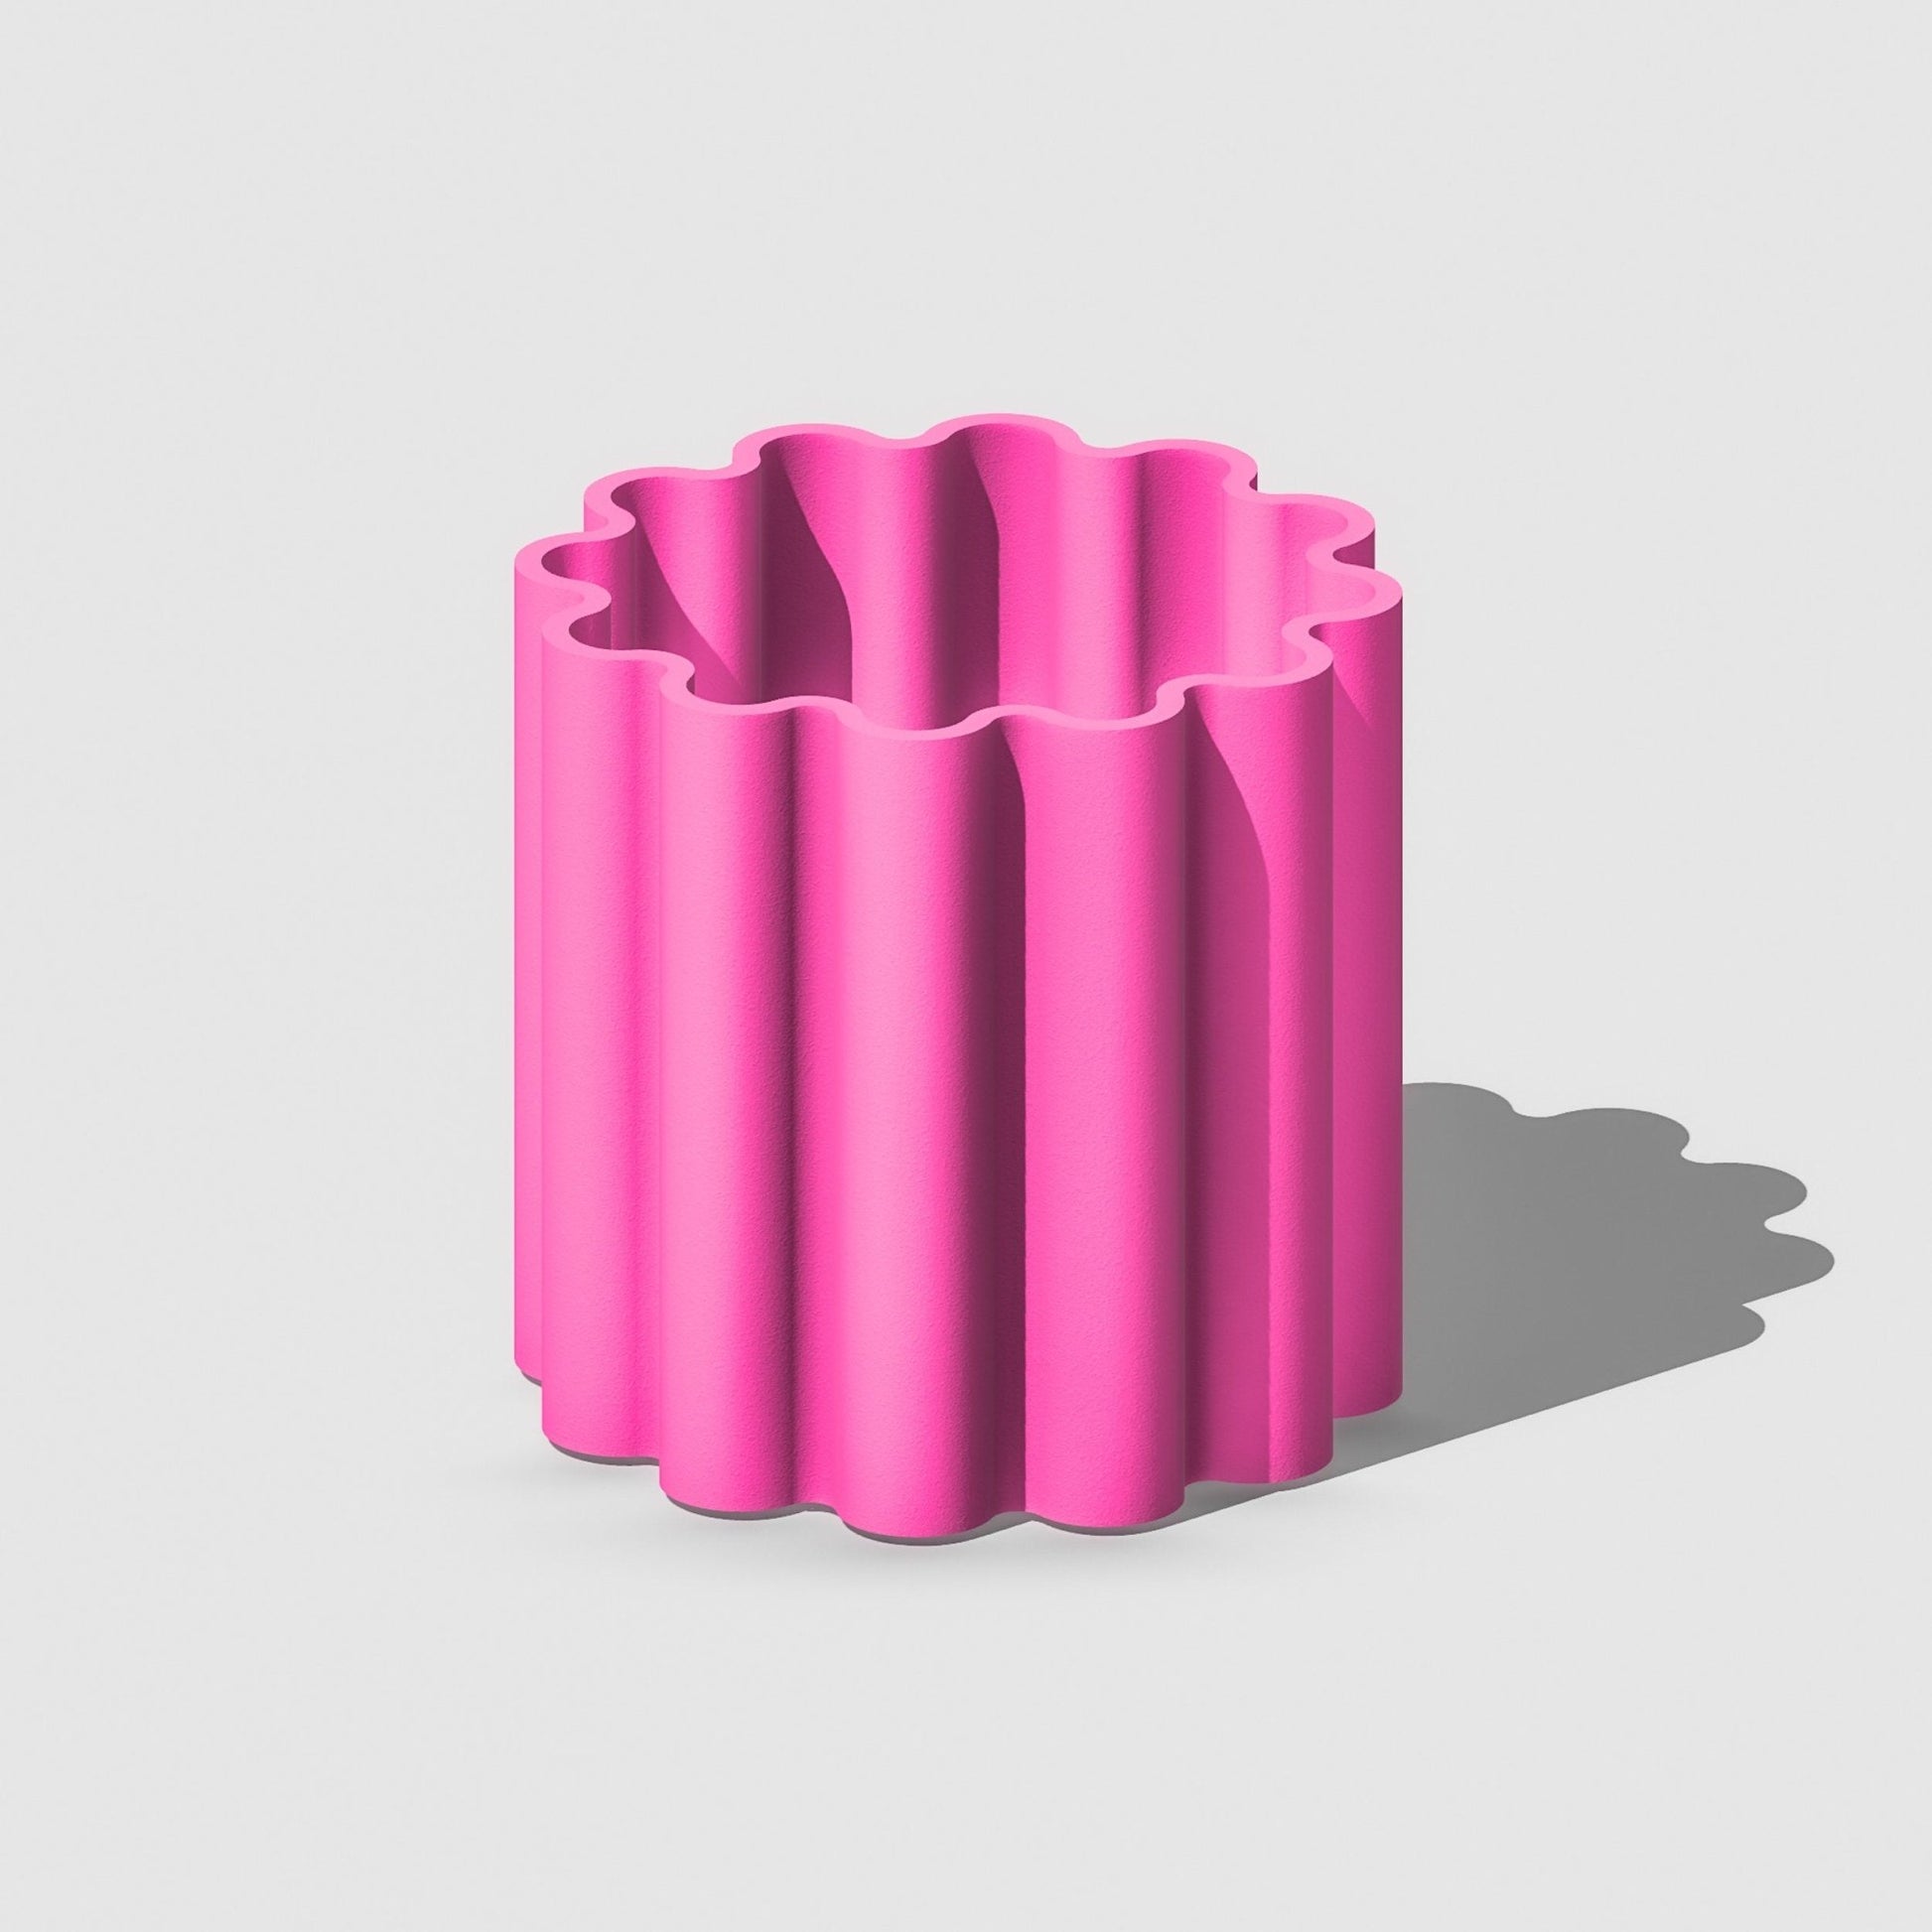 Pink Modern Funky Planter with drainage 'FLOW DESIGN' - Rosebud HomeGoods Pink 4 Inch - No Tray MODERN HOME GOOD